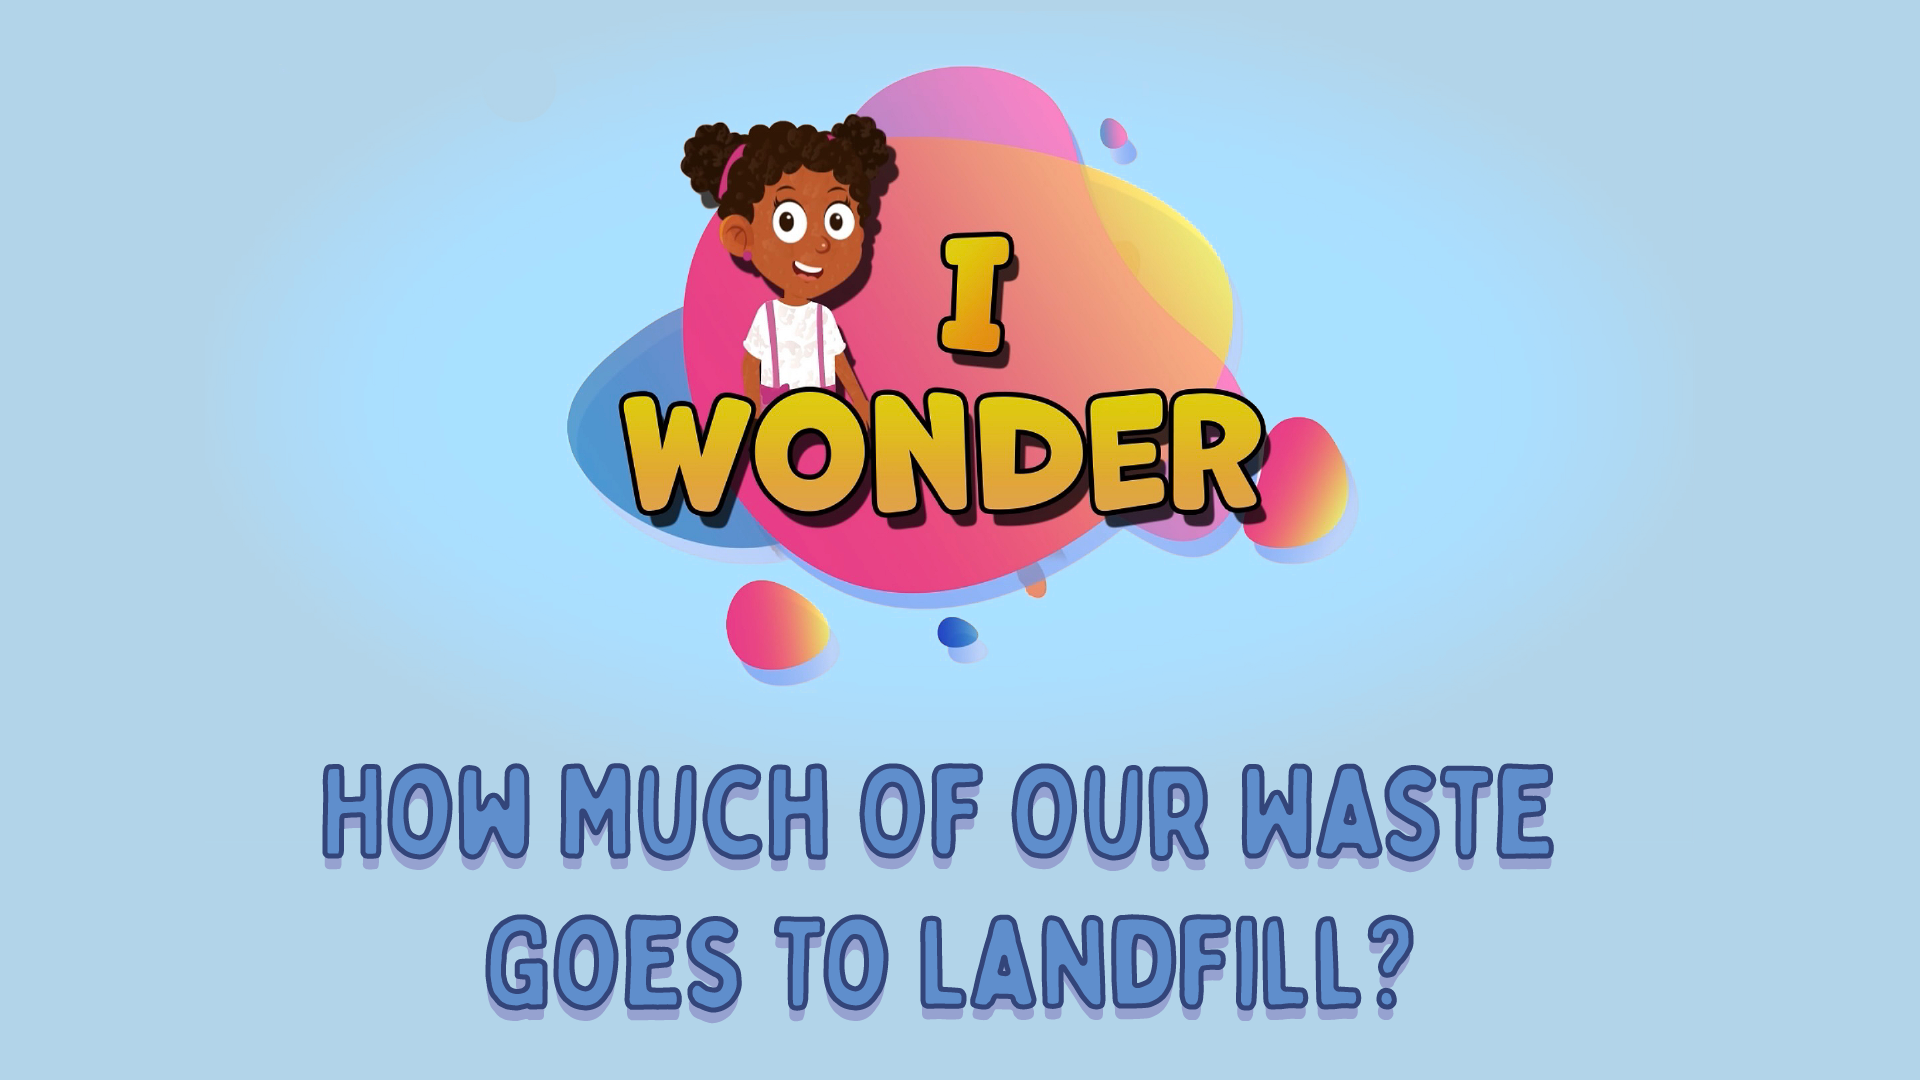 How Much Of Our Waste Goes To Landfill?